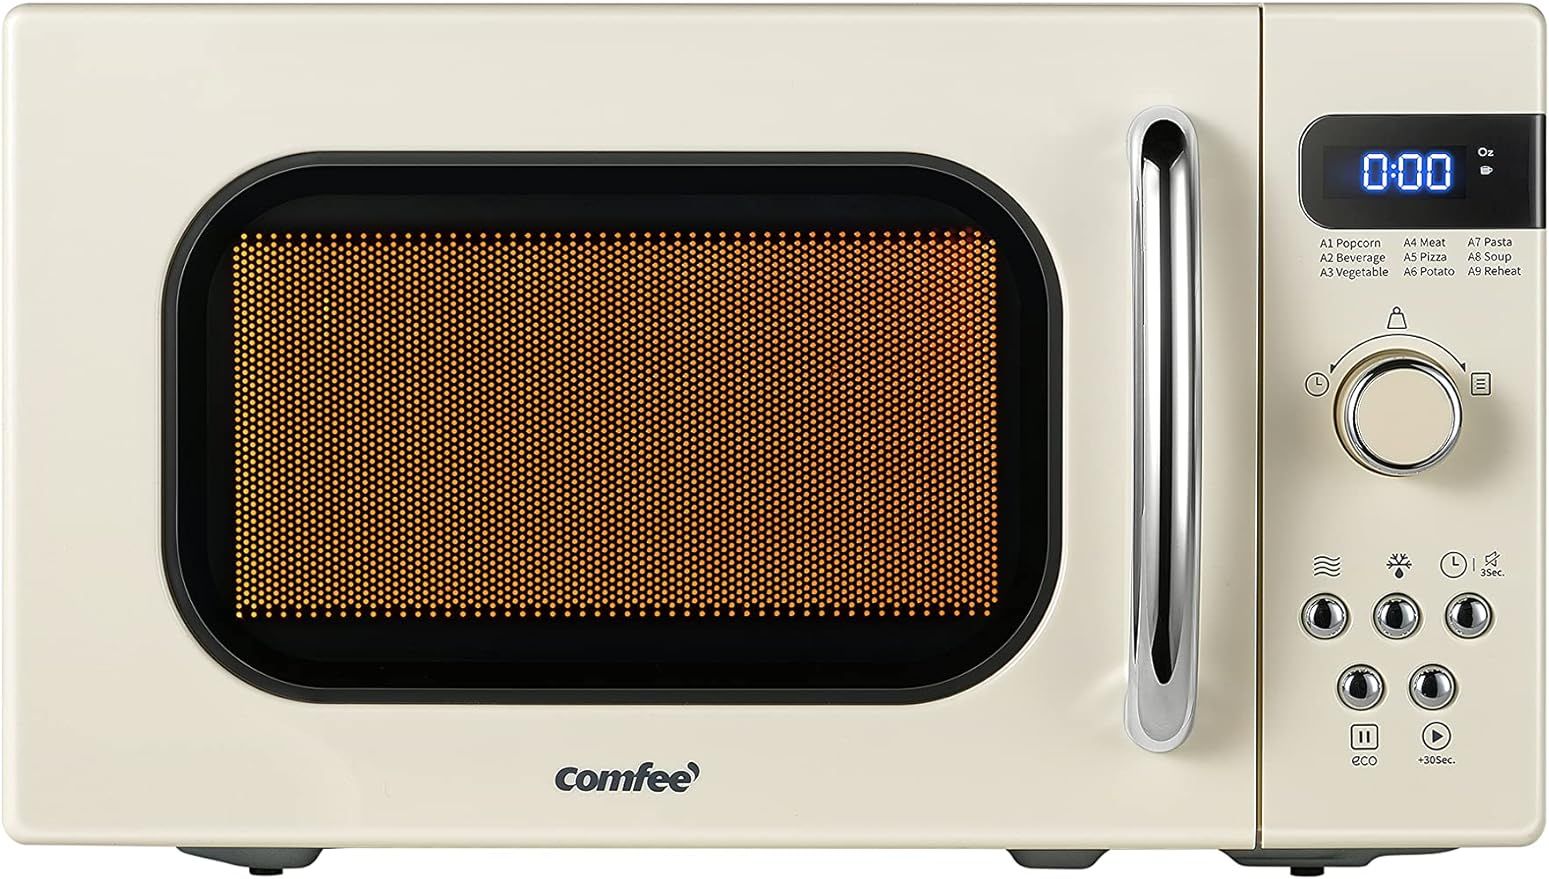 COMFEE' Retro Small Microwave Oven With Compact Size, 9 Preset Menus, Position-Memory Turntable, ... | Amazon (US)